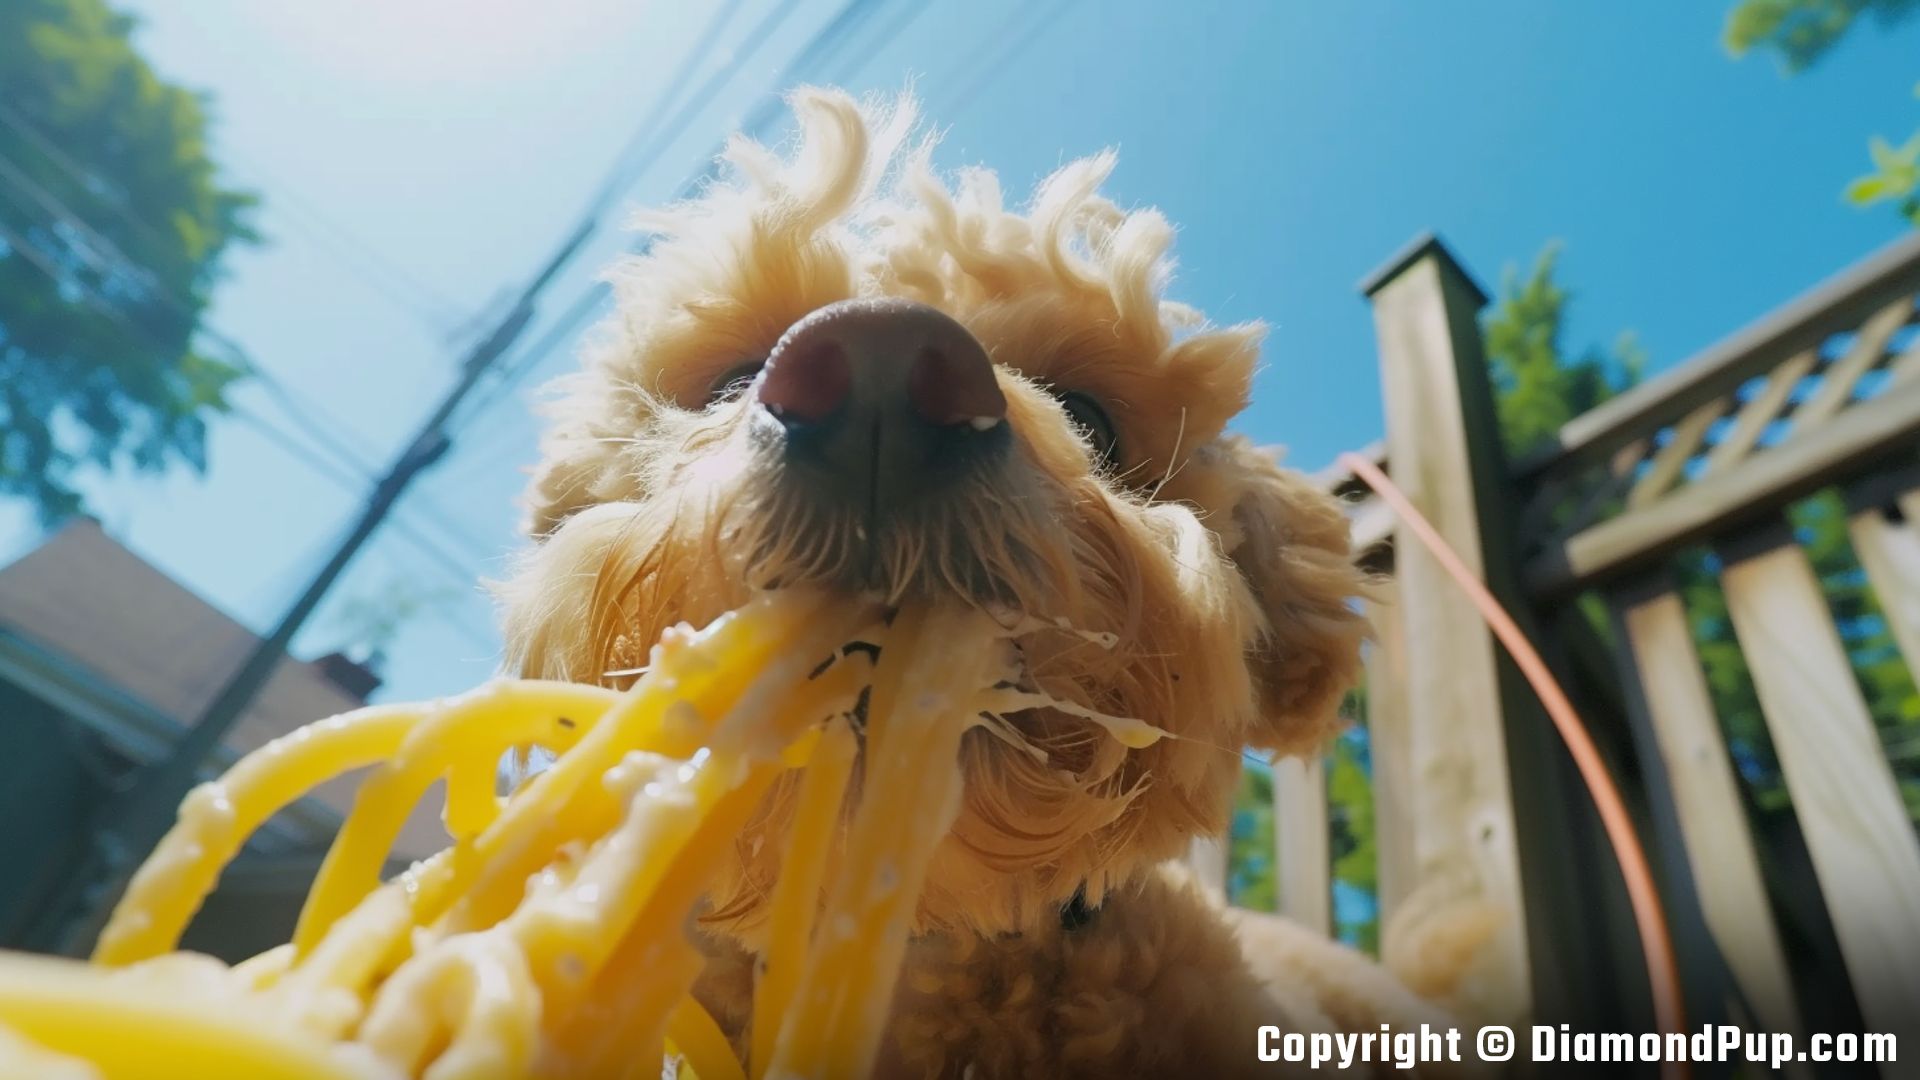 Image of an Adorable Poodle Eating Pasta